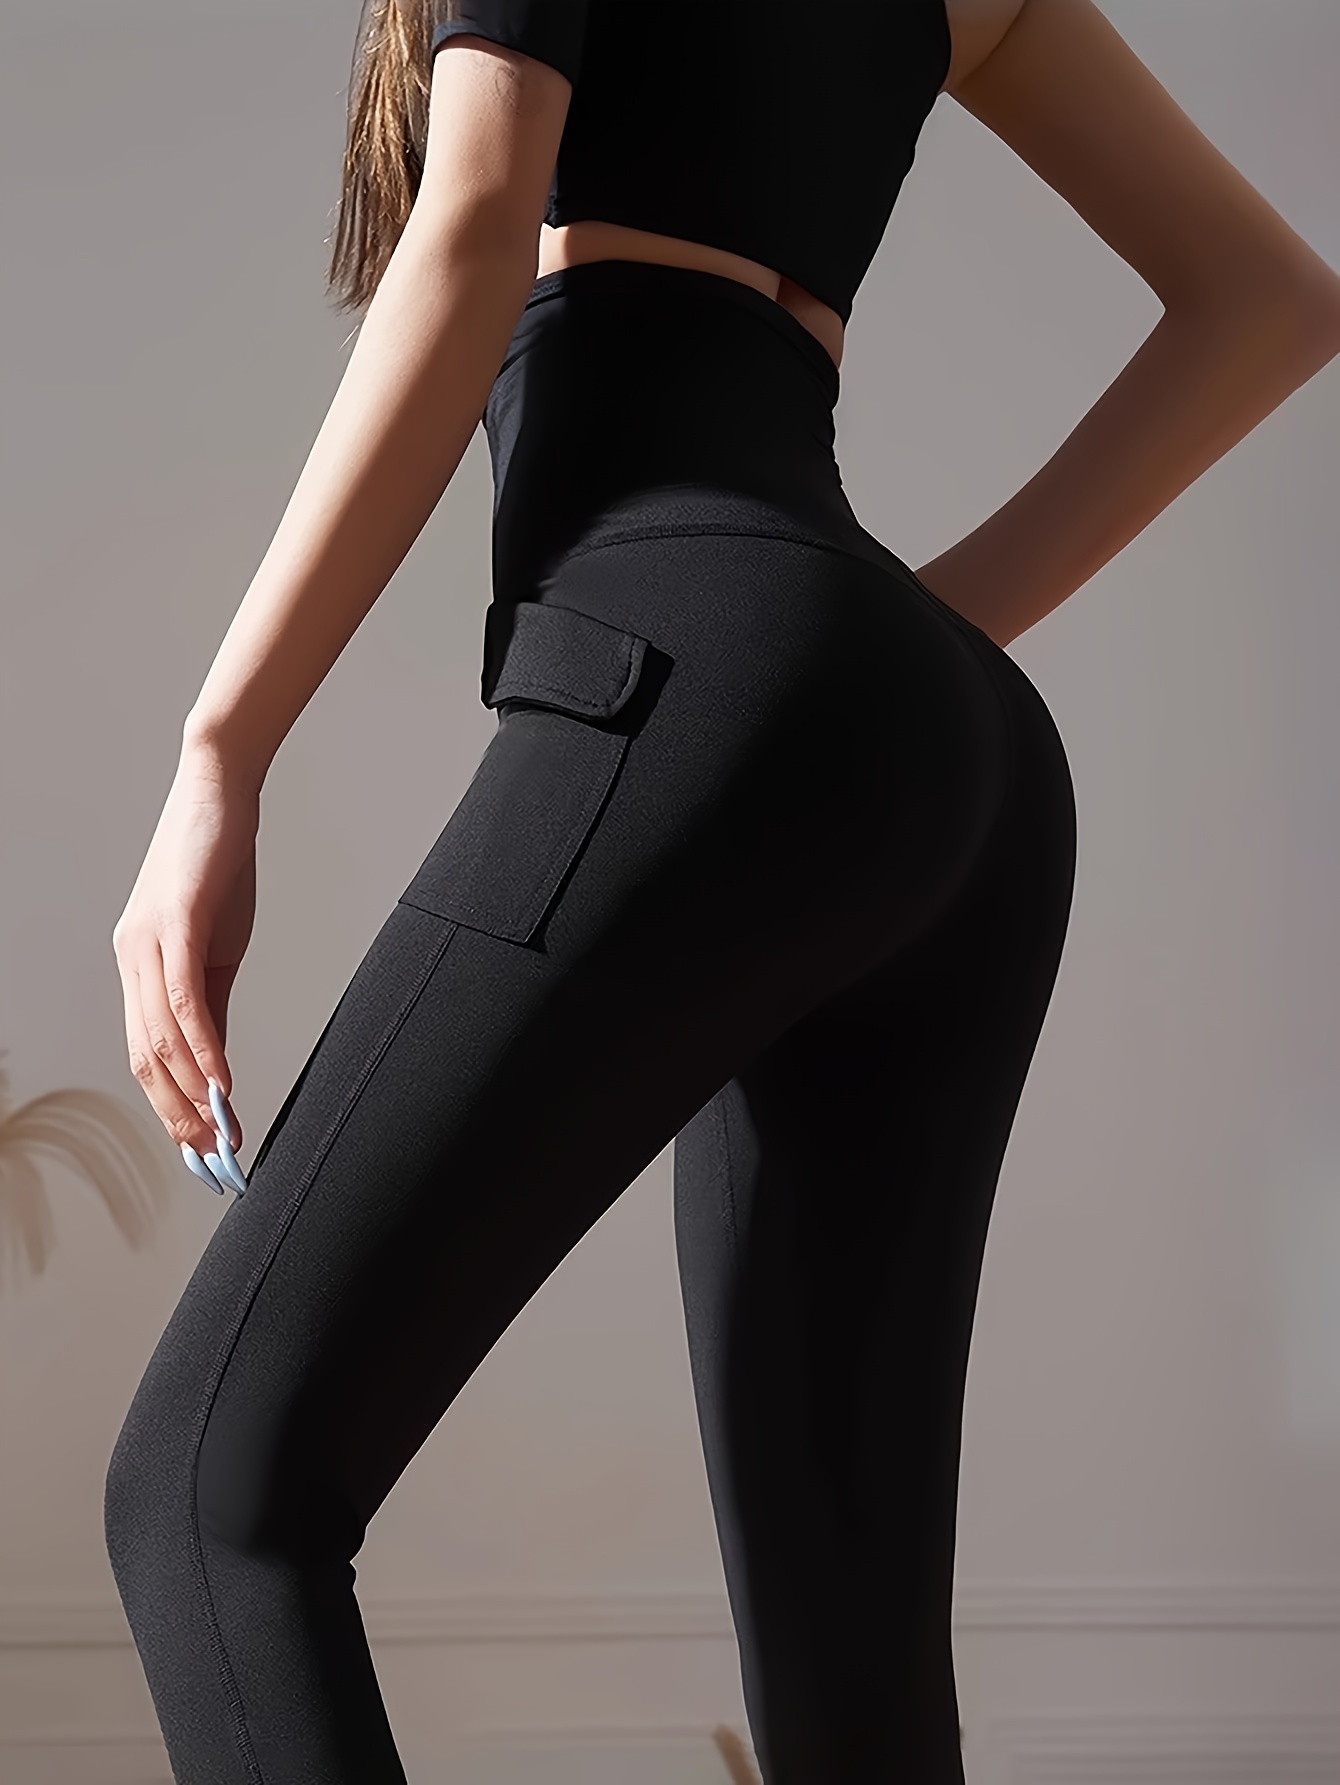 Up To 82% Off on High Waist Leggings Tummy Con